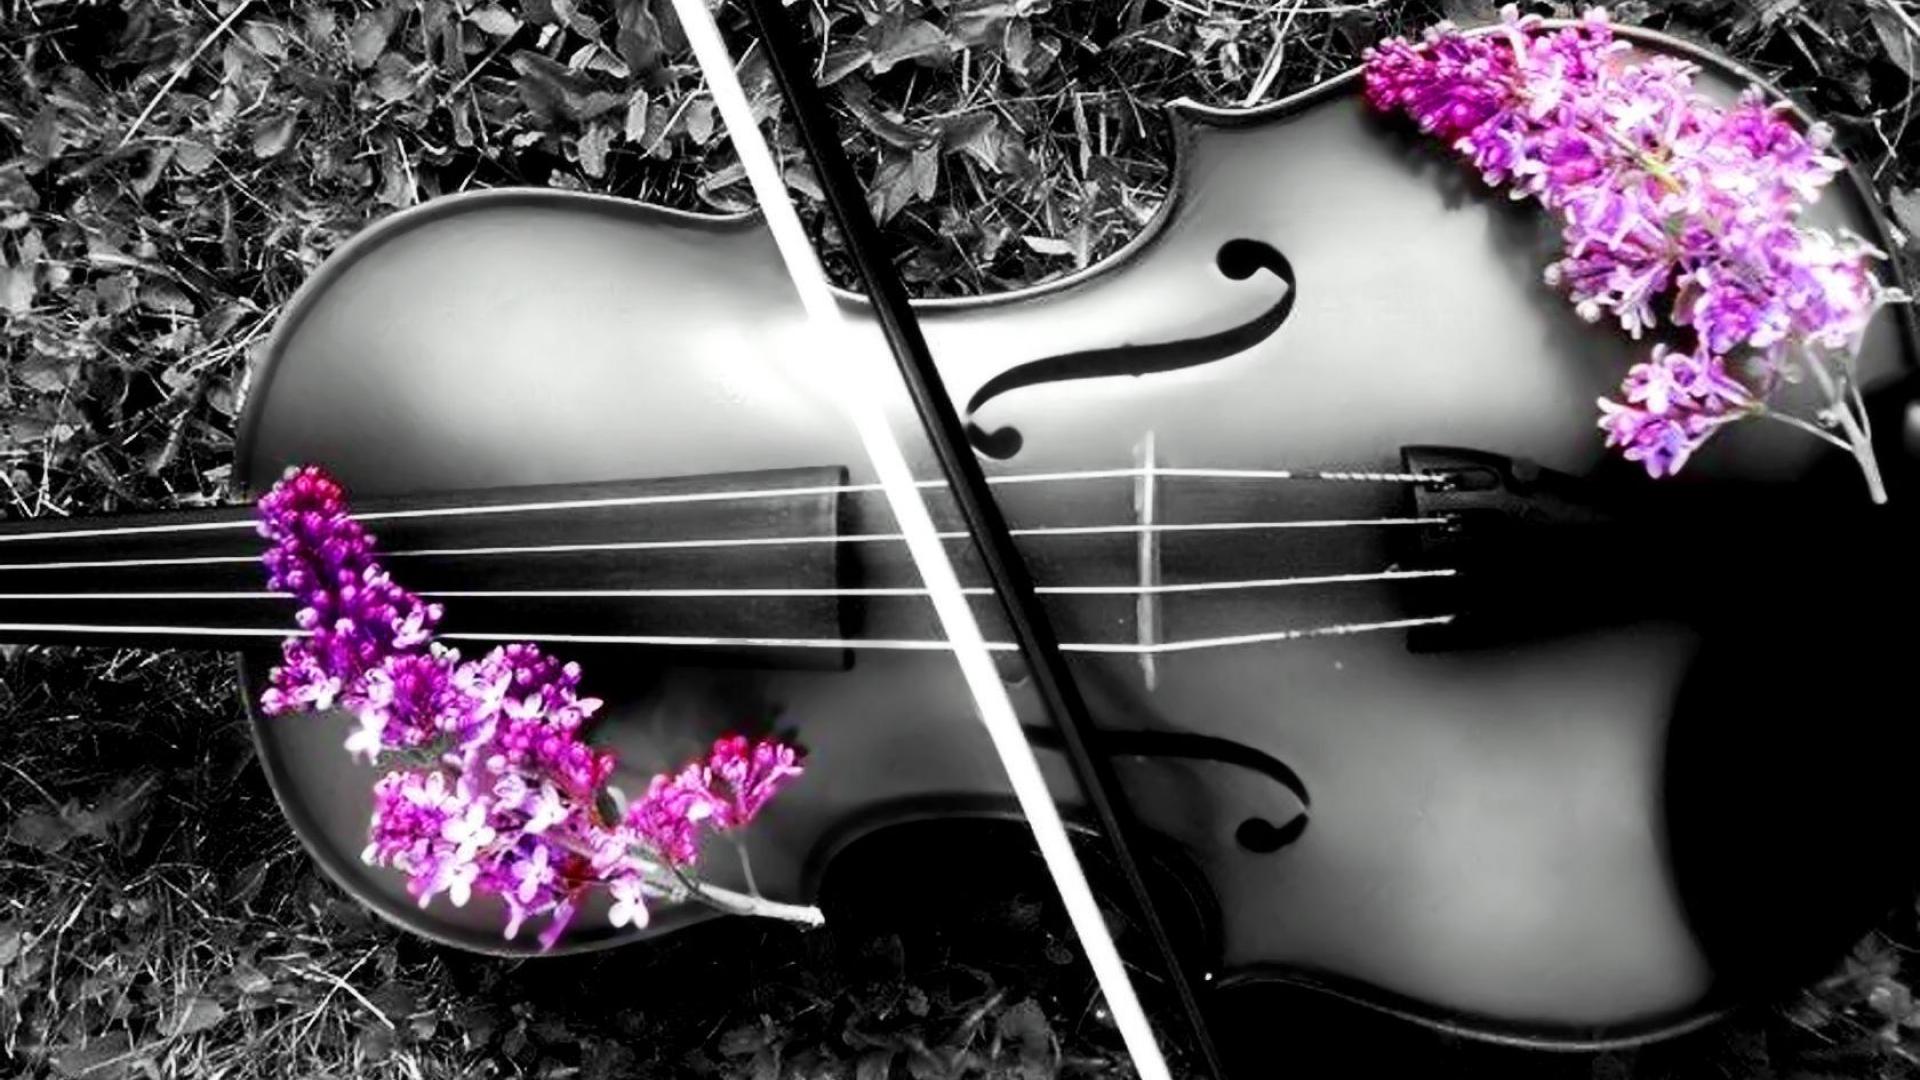 Free download Violin 1080p Wallpaper High Definition High Quality Widescreen [1920x1080] for your Desktop, Mobile & Tablet. Explore Violin Wallpaper. Beautiful Violin Wallpaper, Piano and Violin Wallpaper, Black Violin Wallpaper